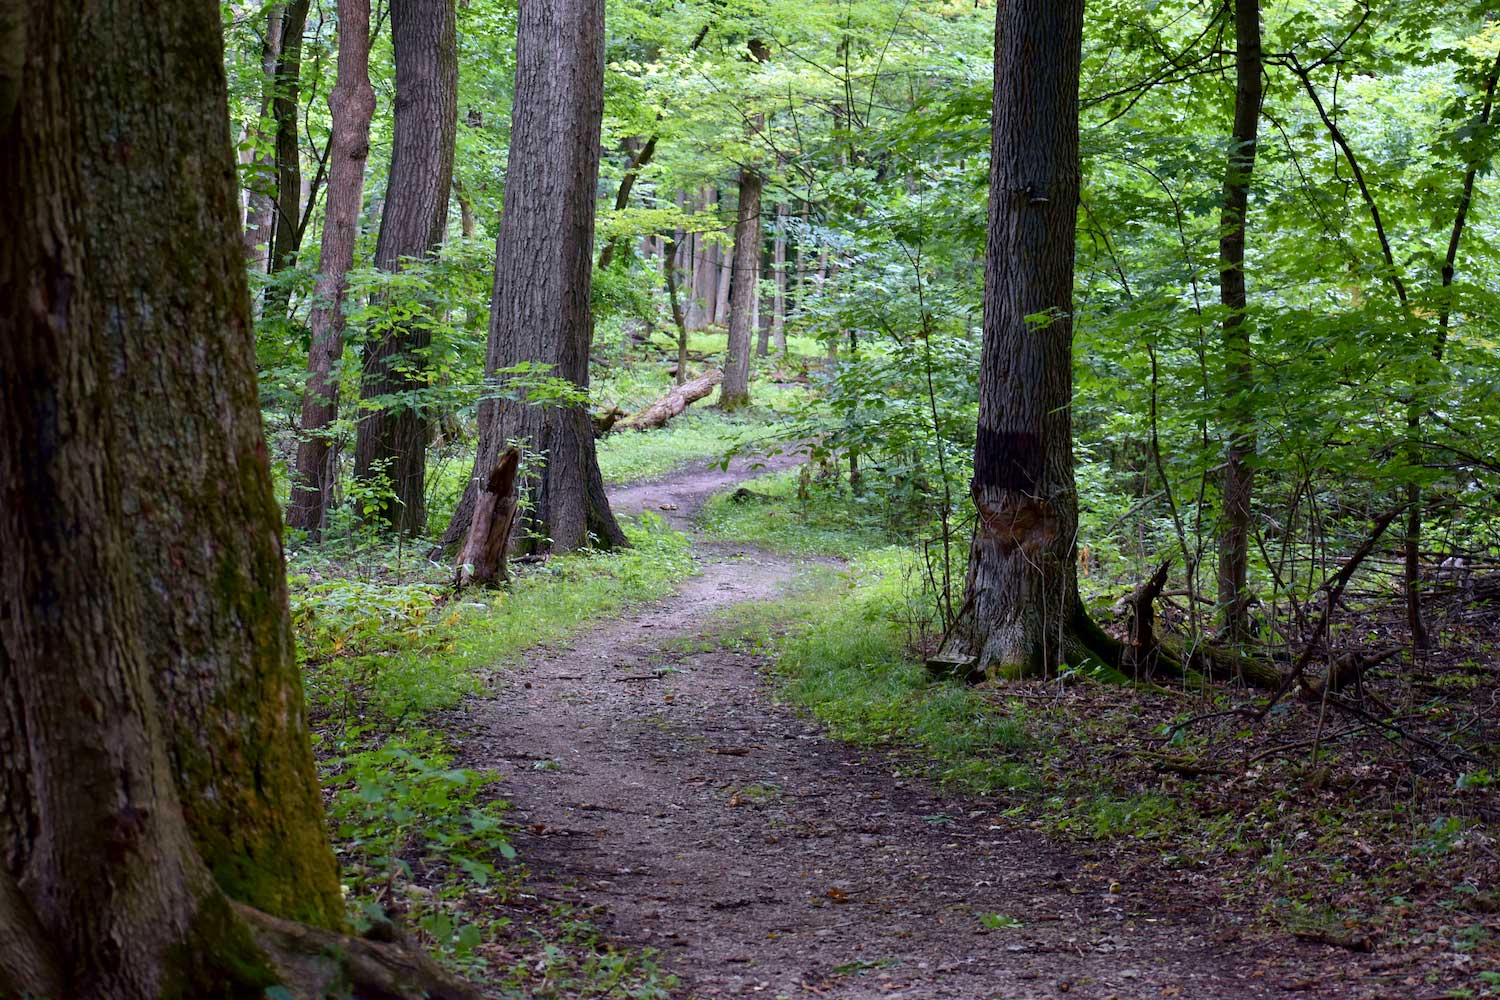 A natural surface trail winding through a lush green forest.